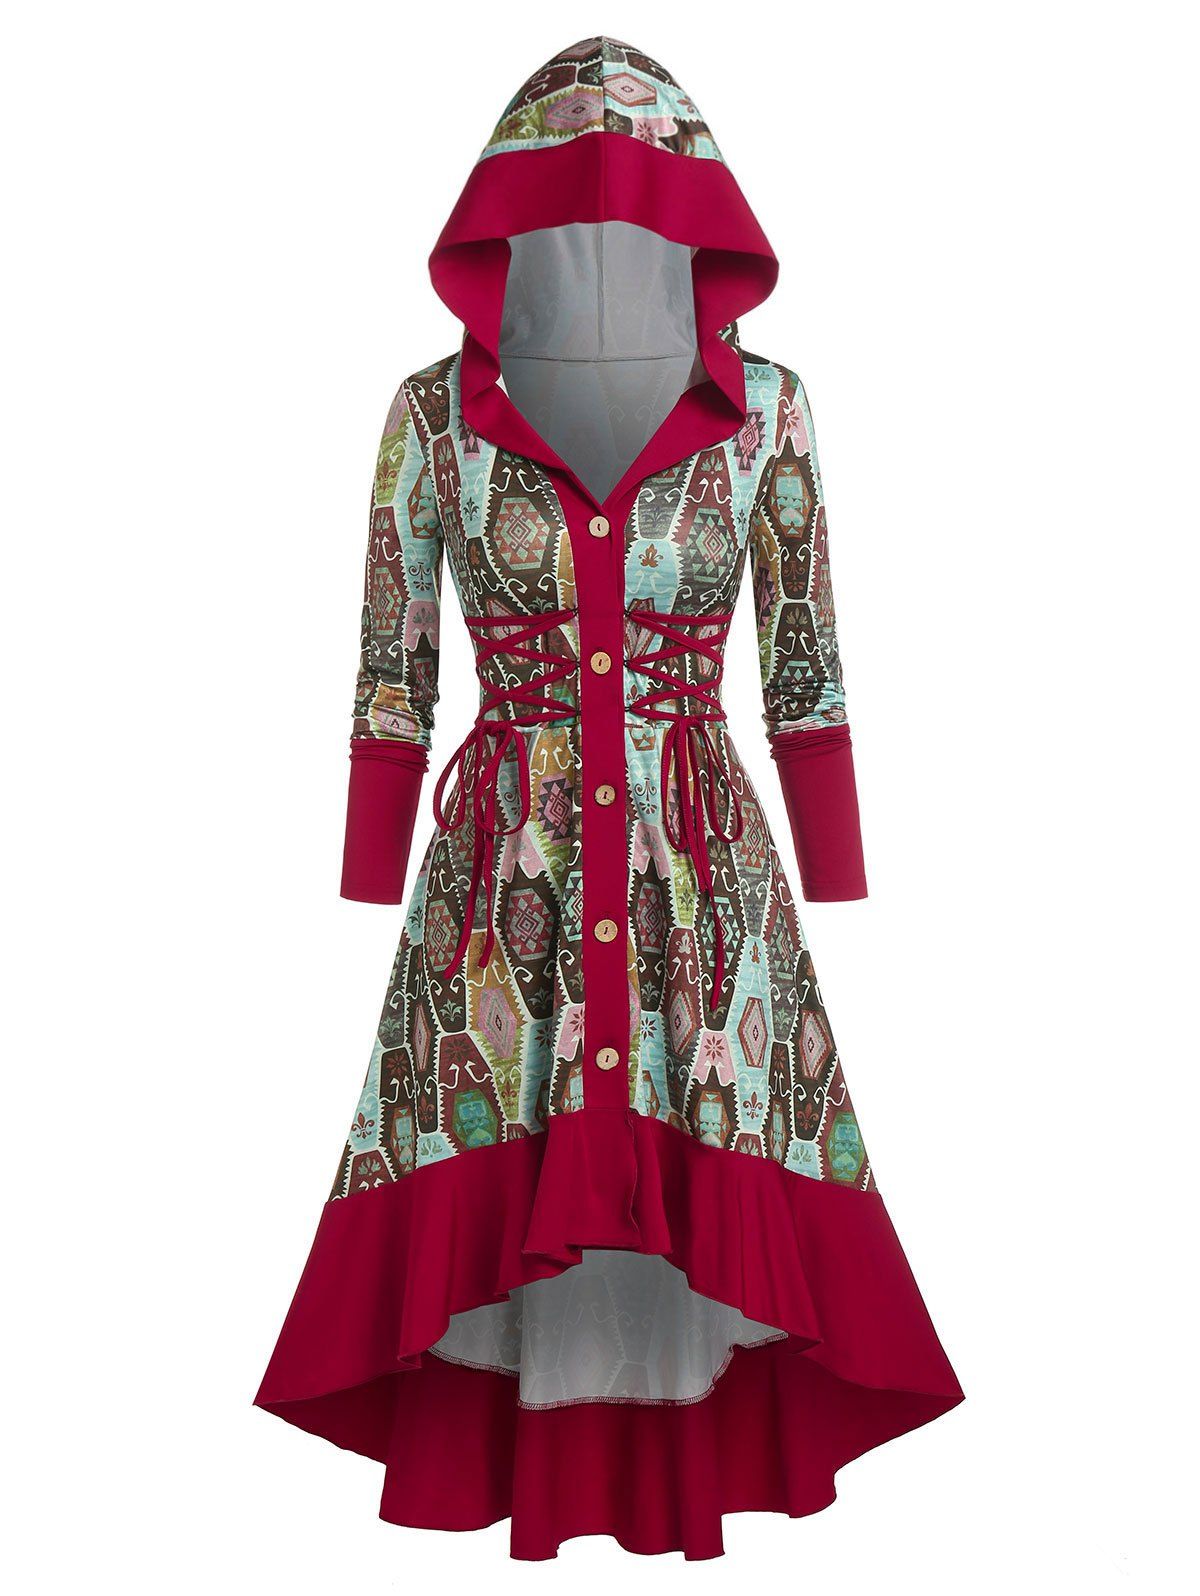 Hooded Print Lace Up High Low Midi Dress - DEEP RED XXL